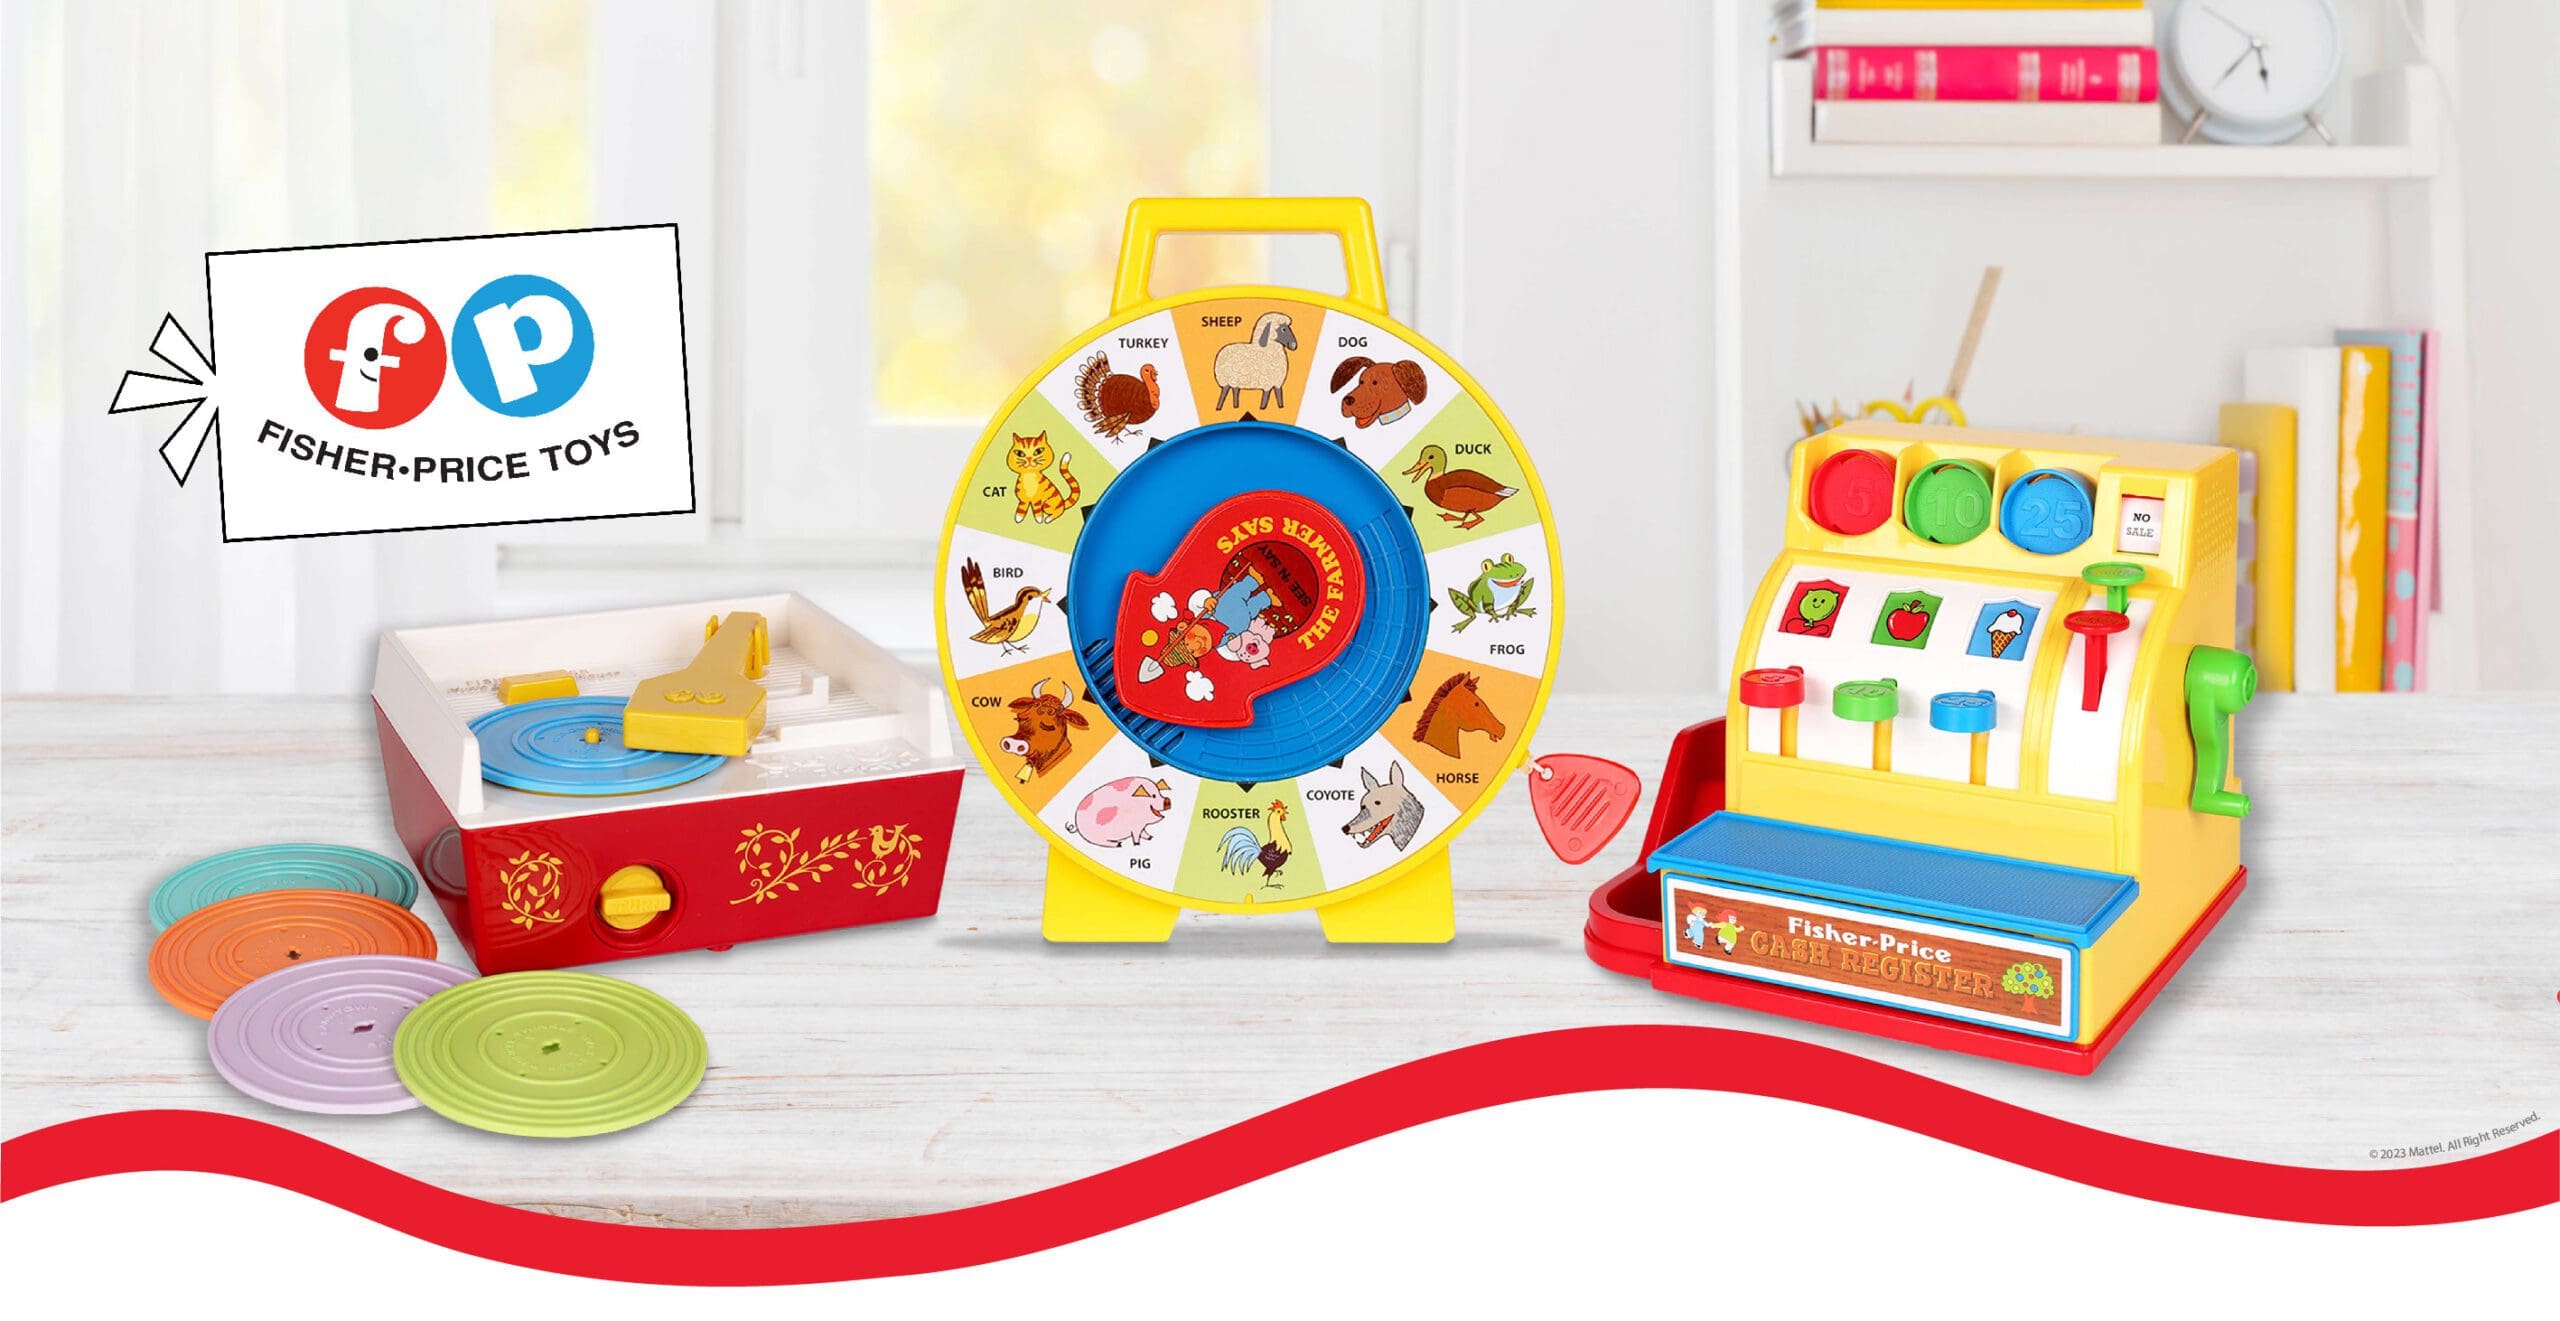 Fisher price banner showing three toys on a desk background